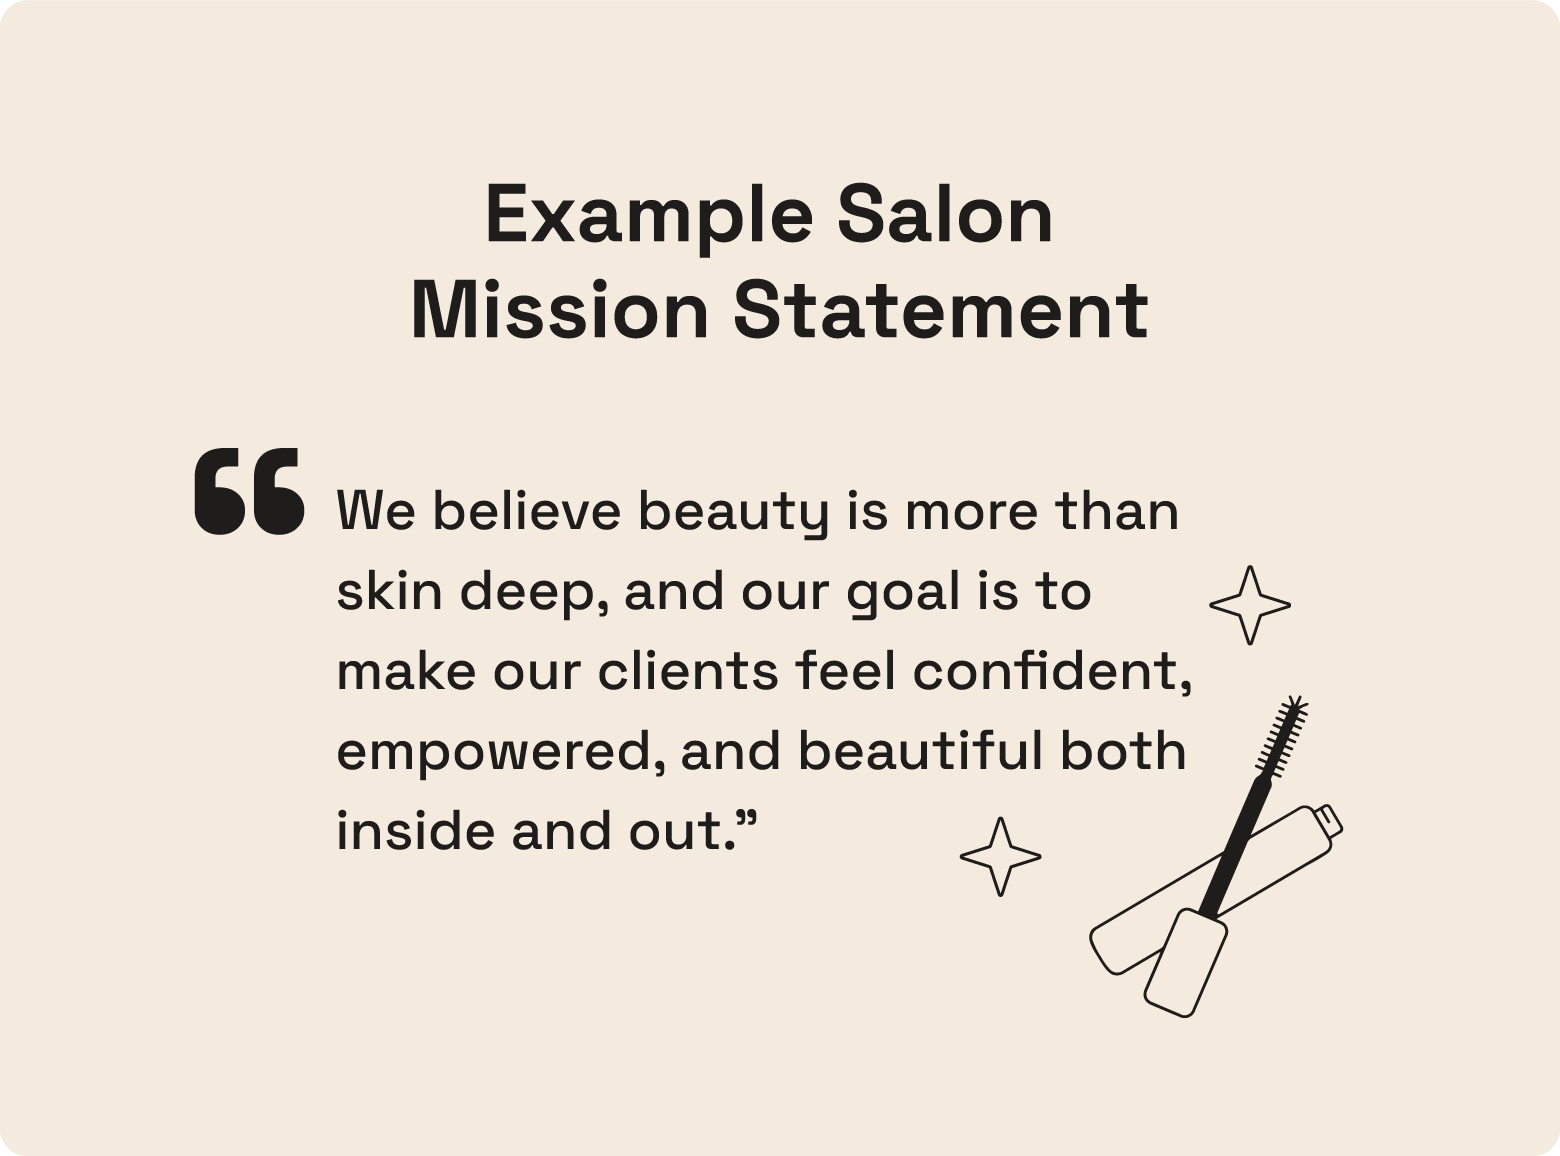 An example of a salon mission statement.